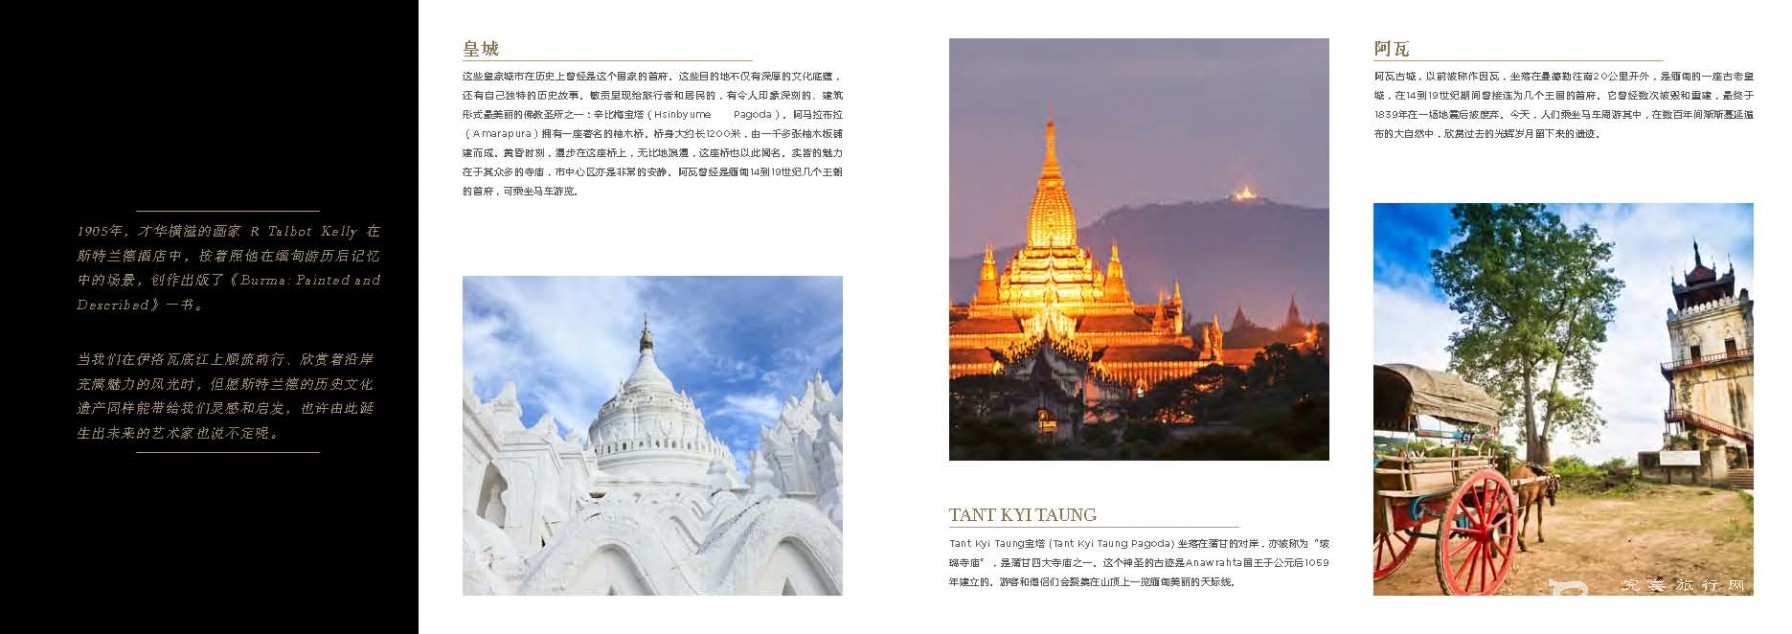 The Strand Cruise Brochure_CN_Page_17.jpg